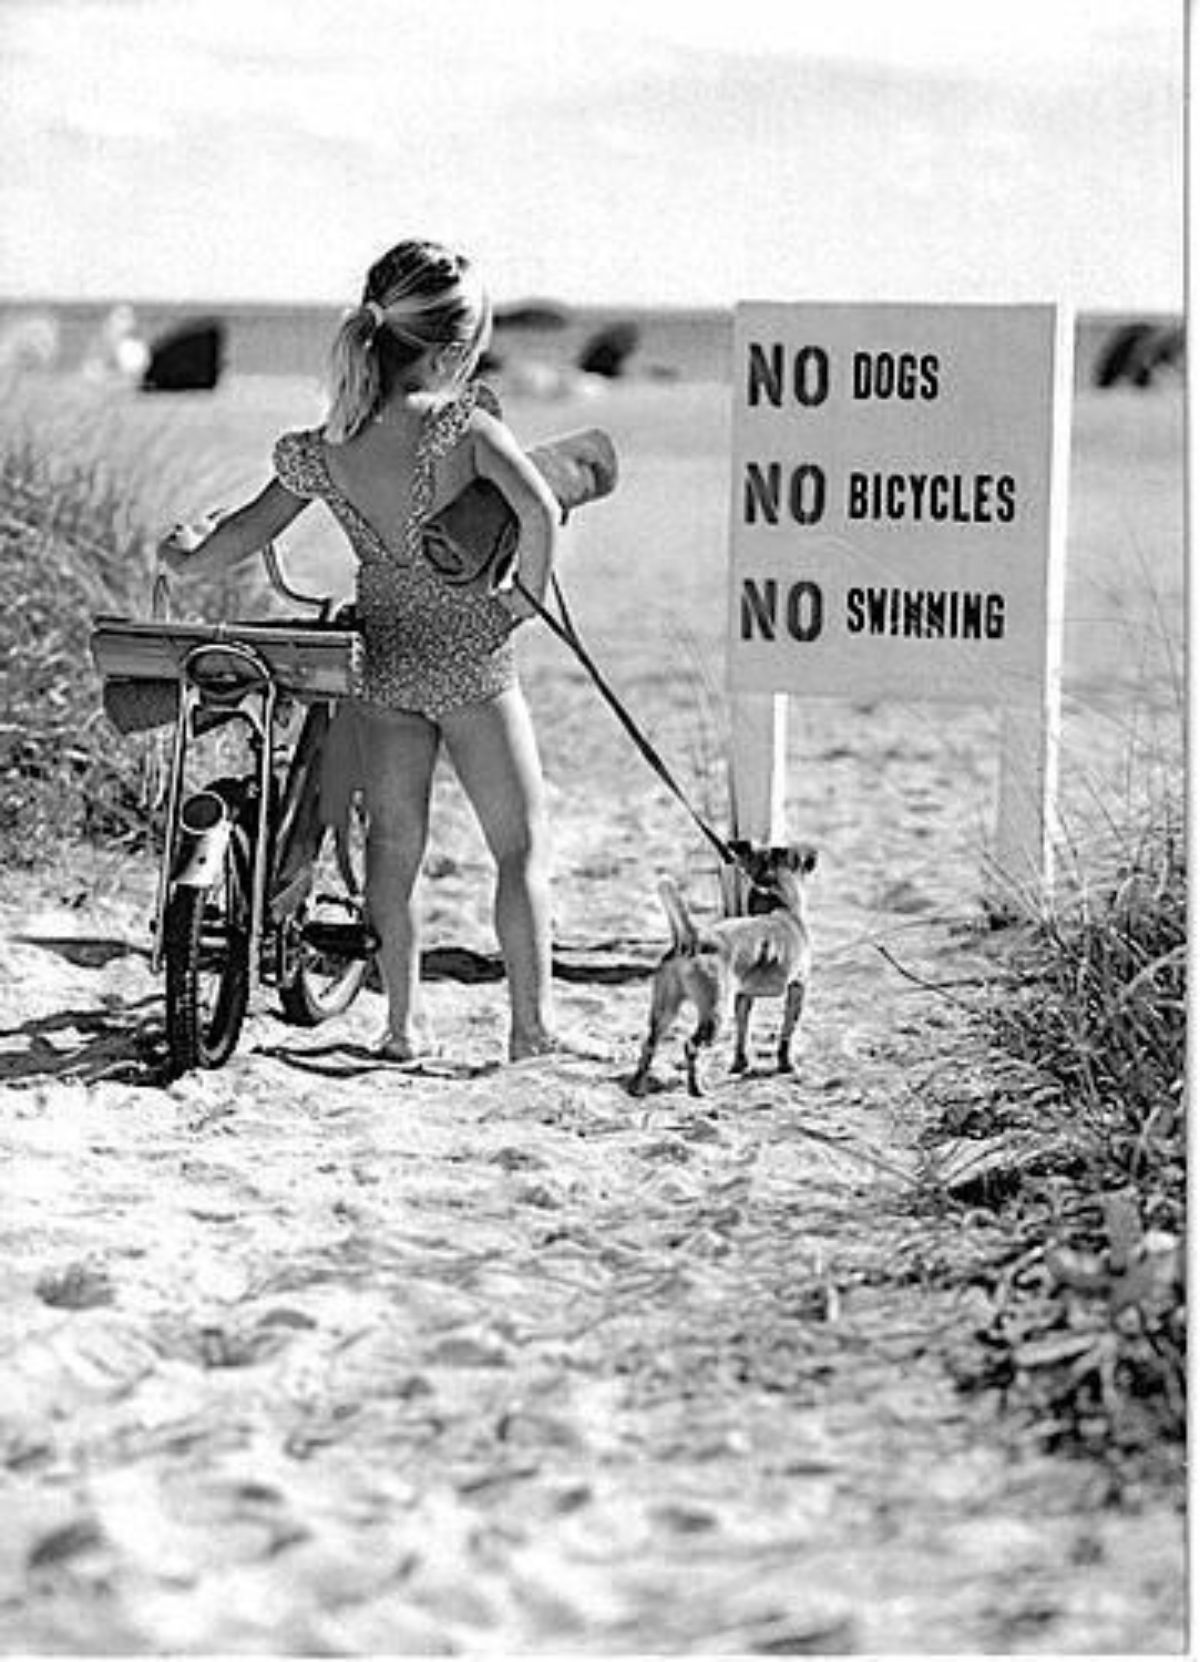 black and white photo of little girl with a small dog in front of a NO DOGS NO BICYCLES NO SWIMMING sign